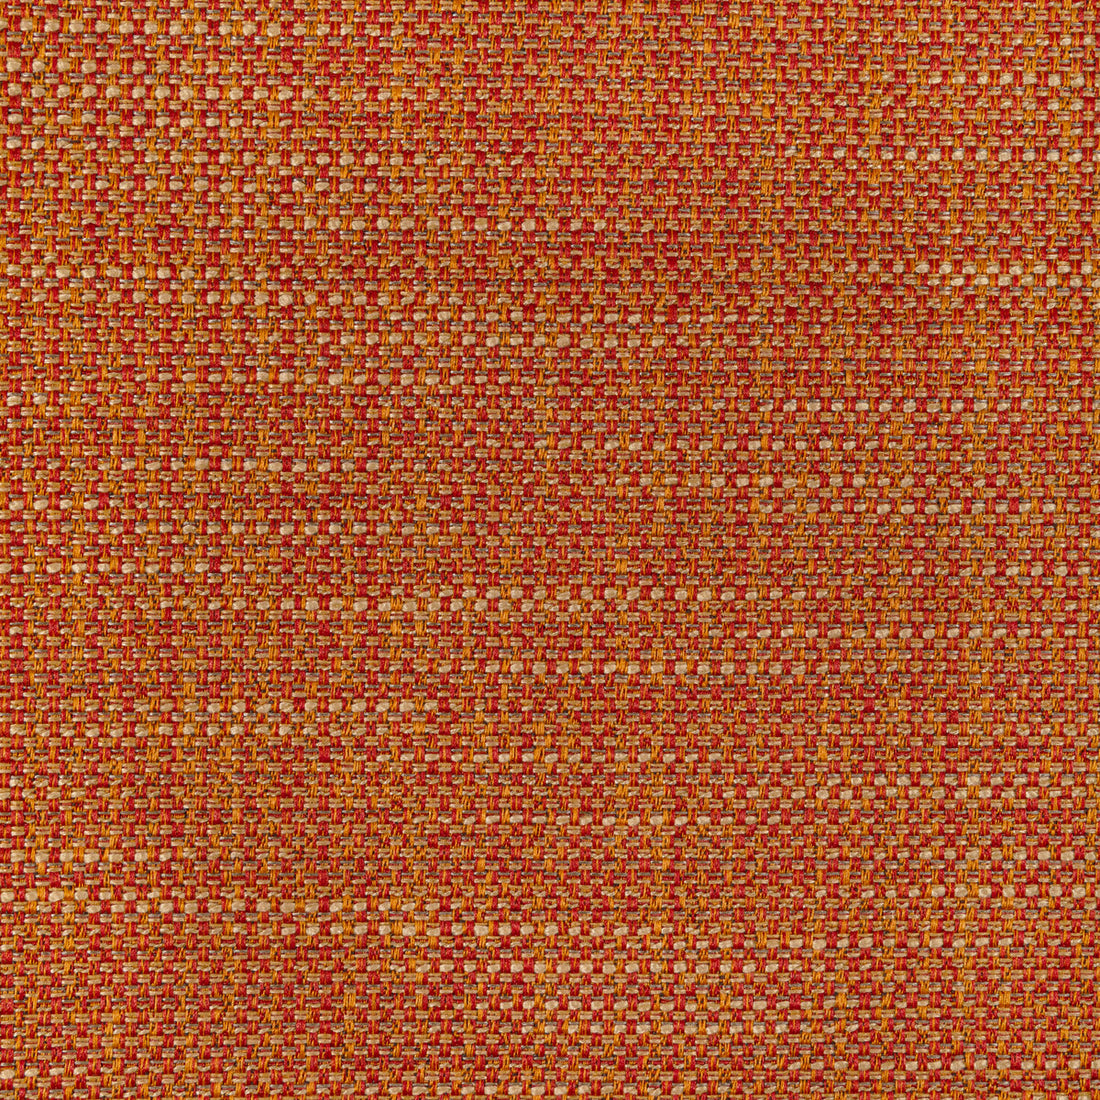 Luma Texture fabric in cayenne color - pattern 4947.1211.0 - by Kravet Contract in the Fr Window Luma Texture collection